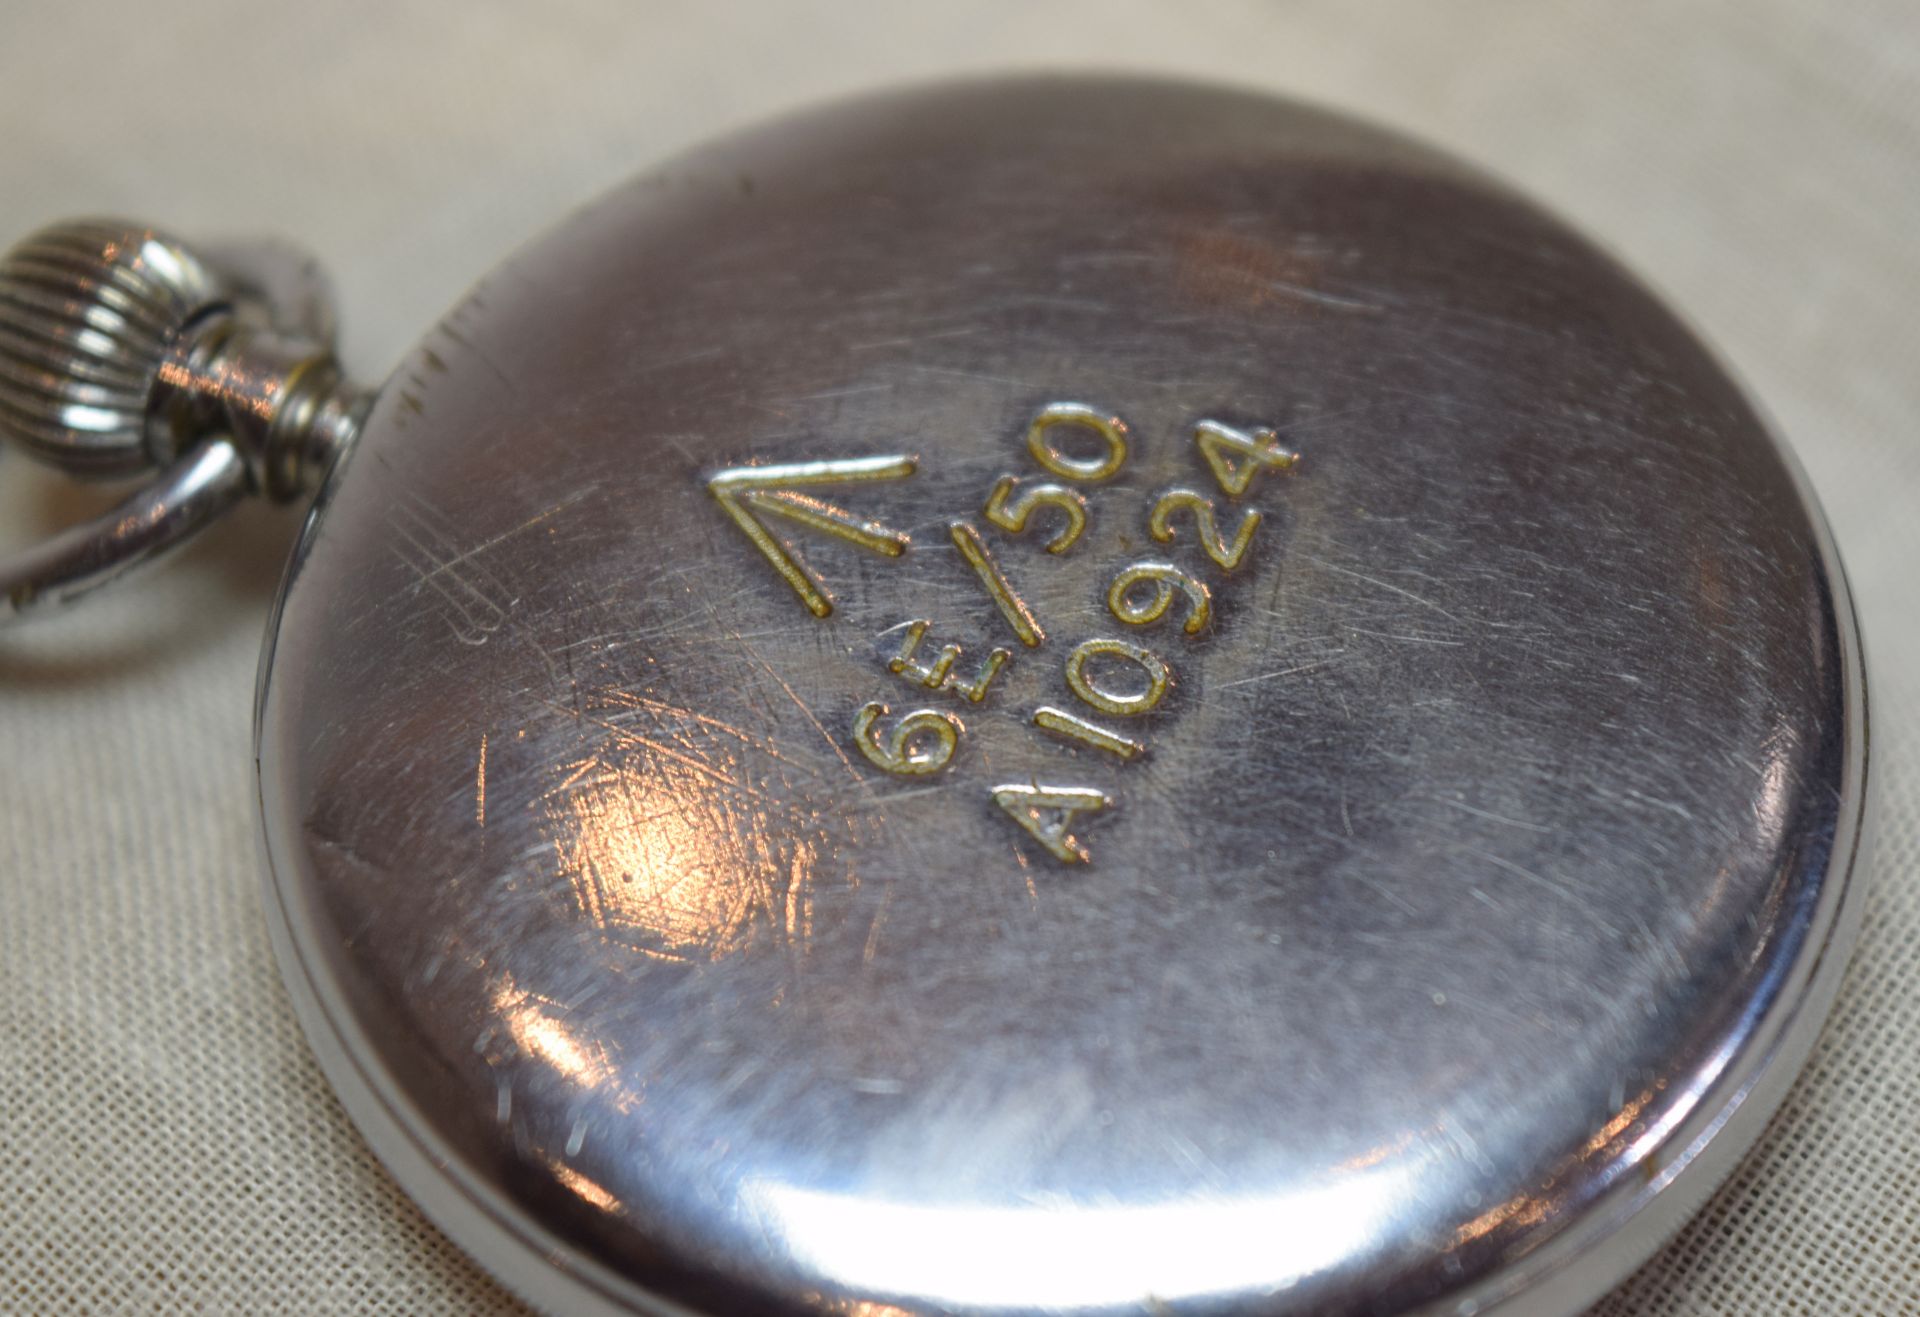 Jaeger LeCoultre WW2 Military Pocket Watch - Image 4 of 6